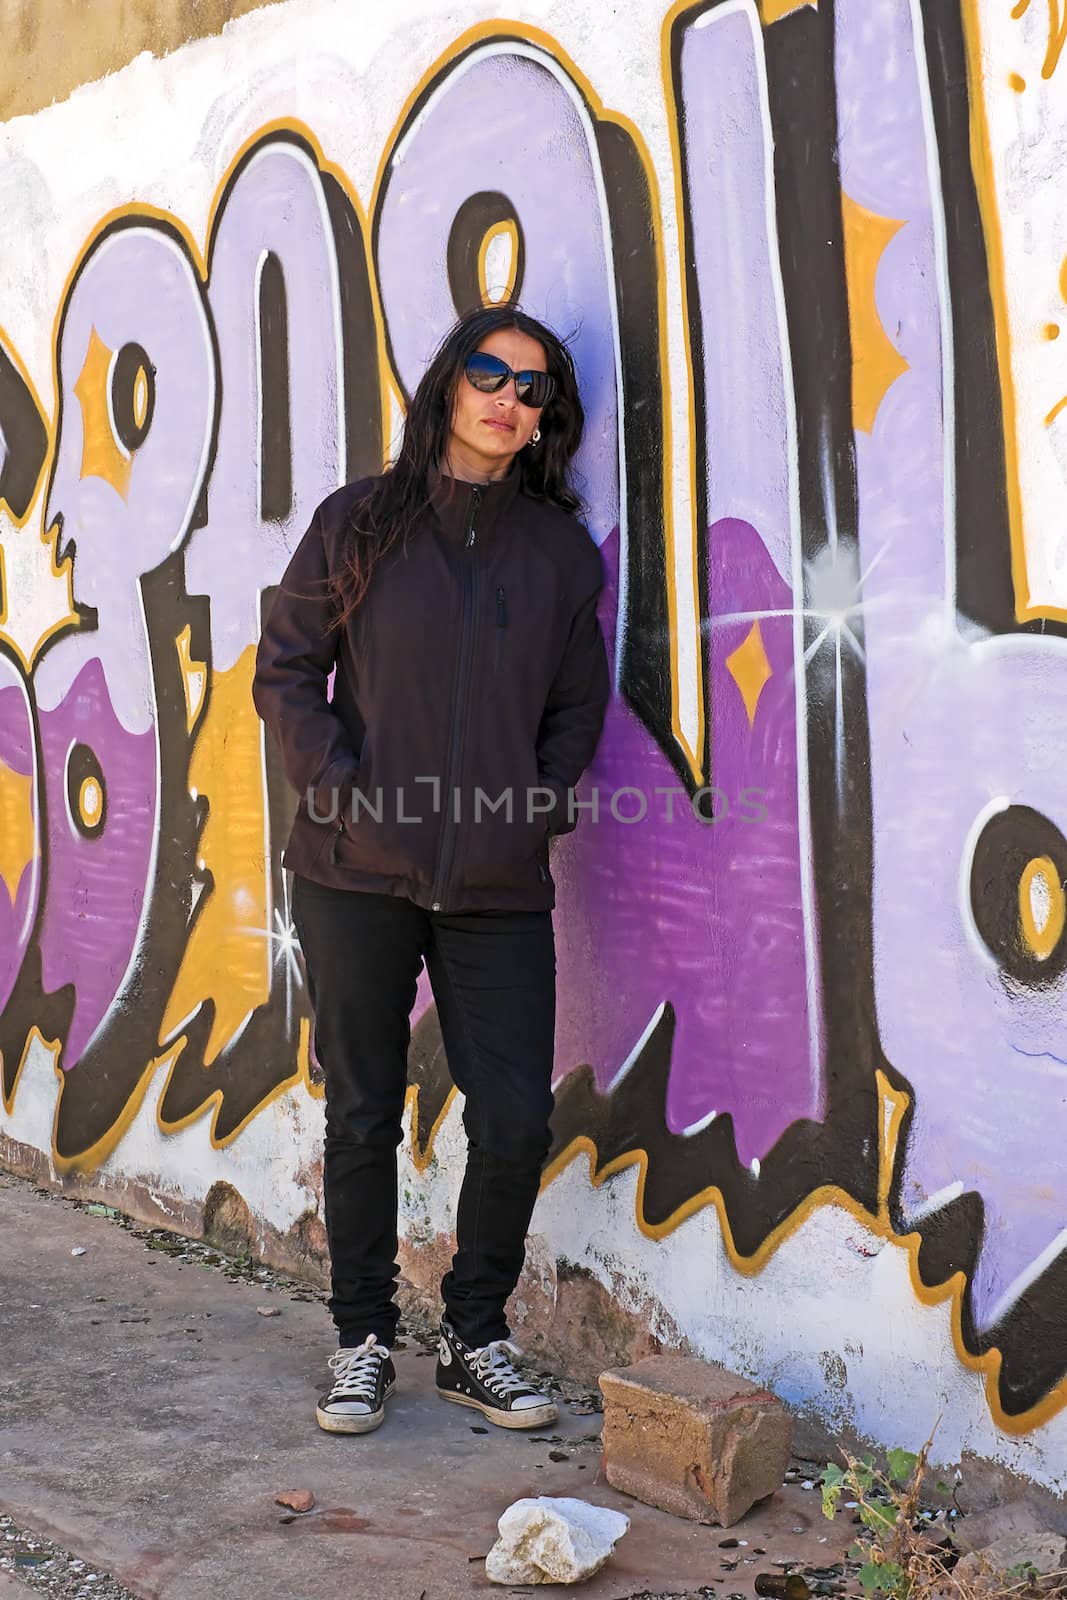 Woman in black at the graffiti brick wall by devy